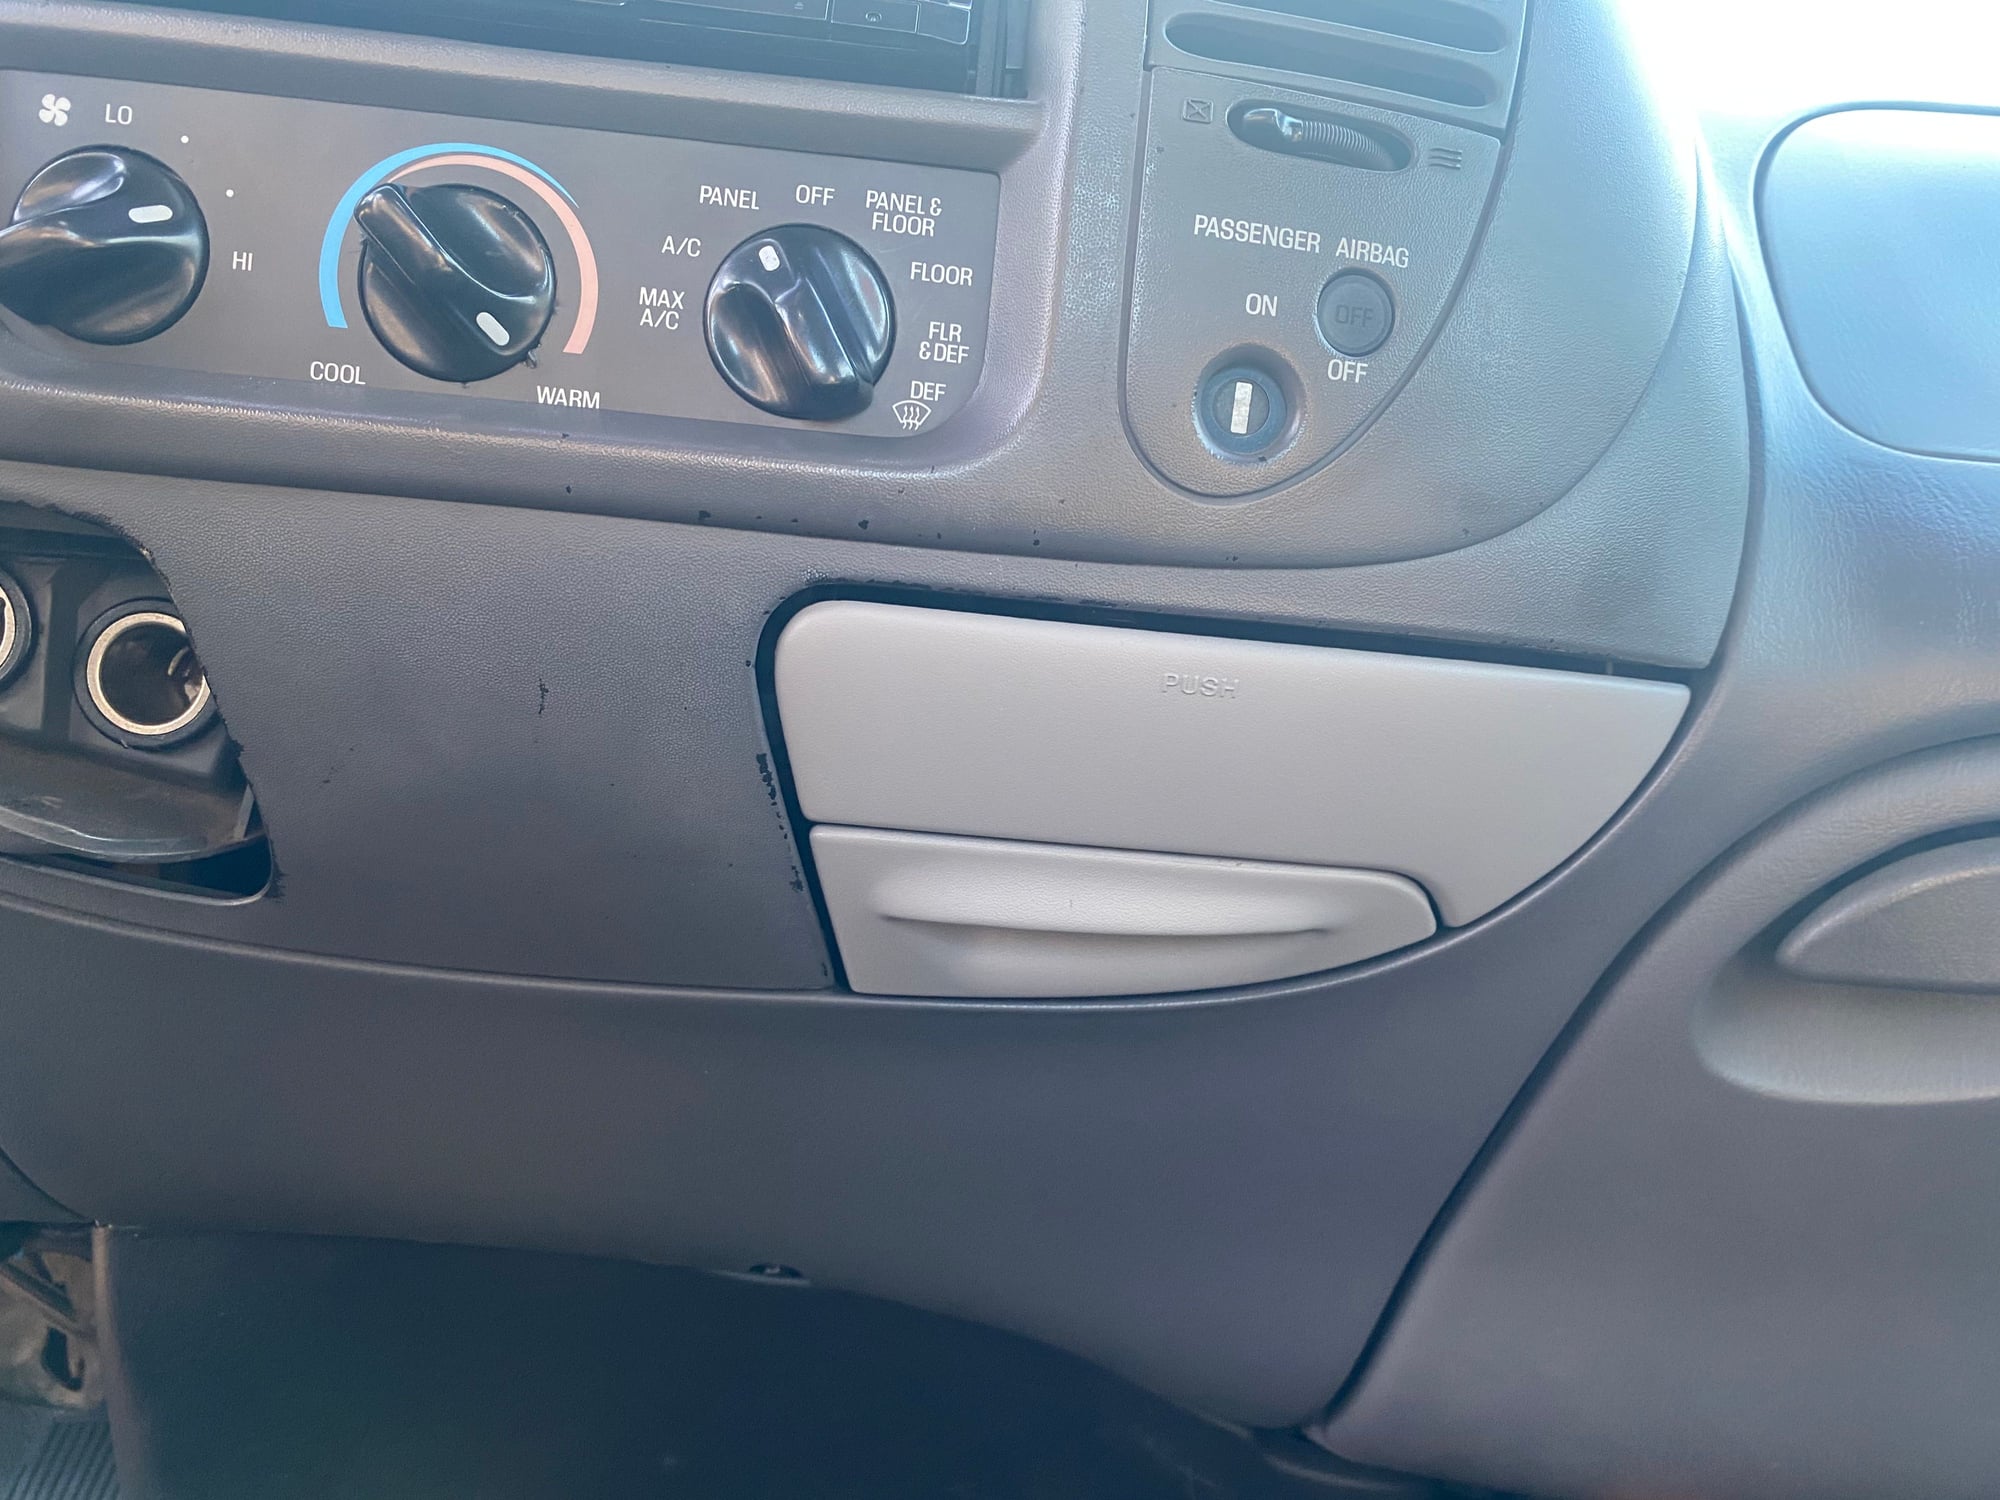 2000 F150 interior paint - Ford F150 Forum - Community of Ford Truck Fans